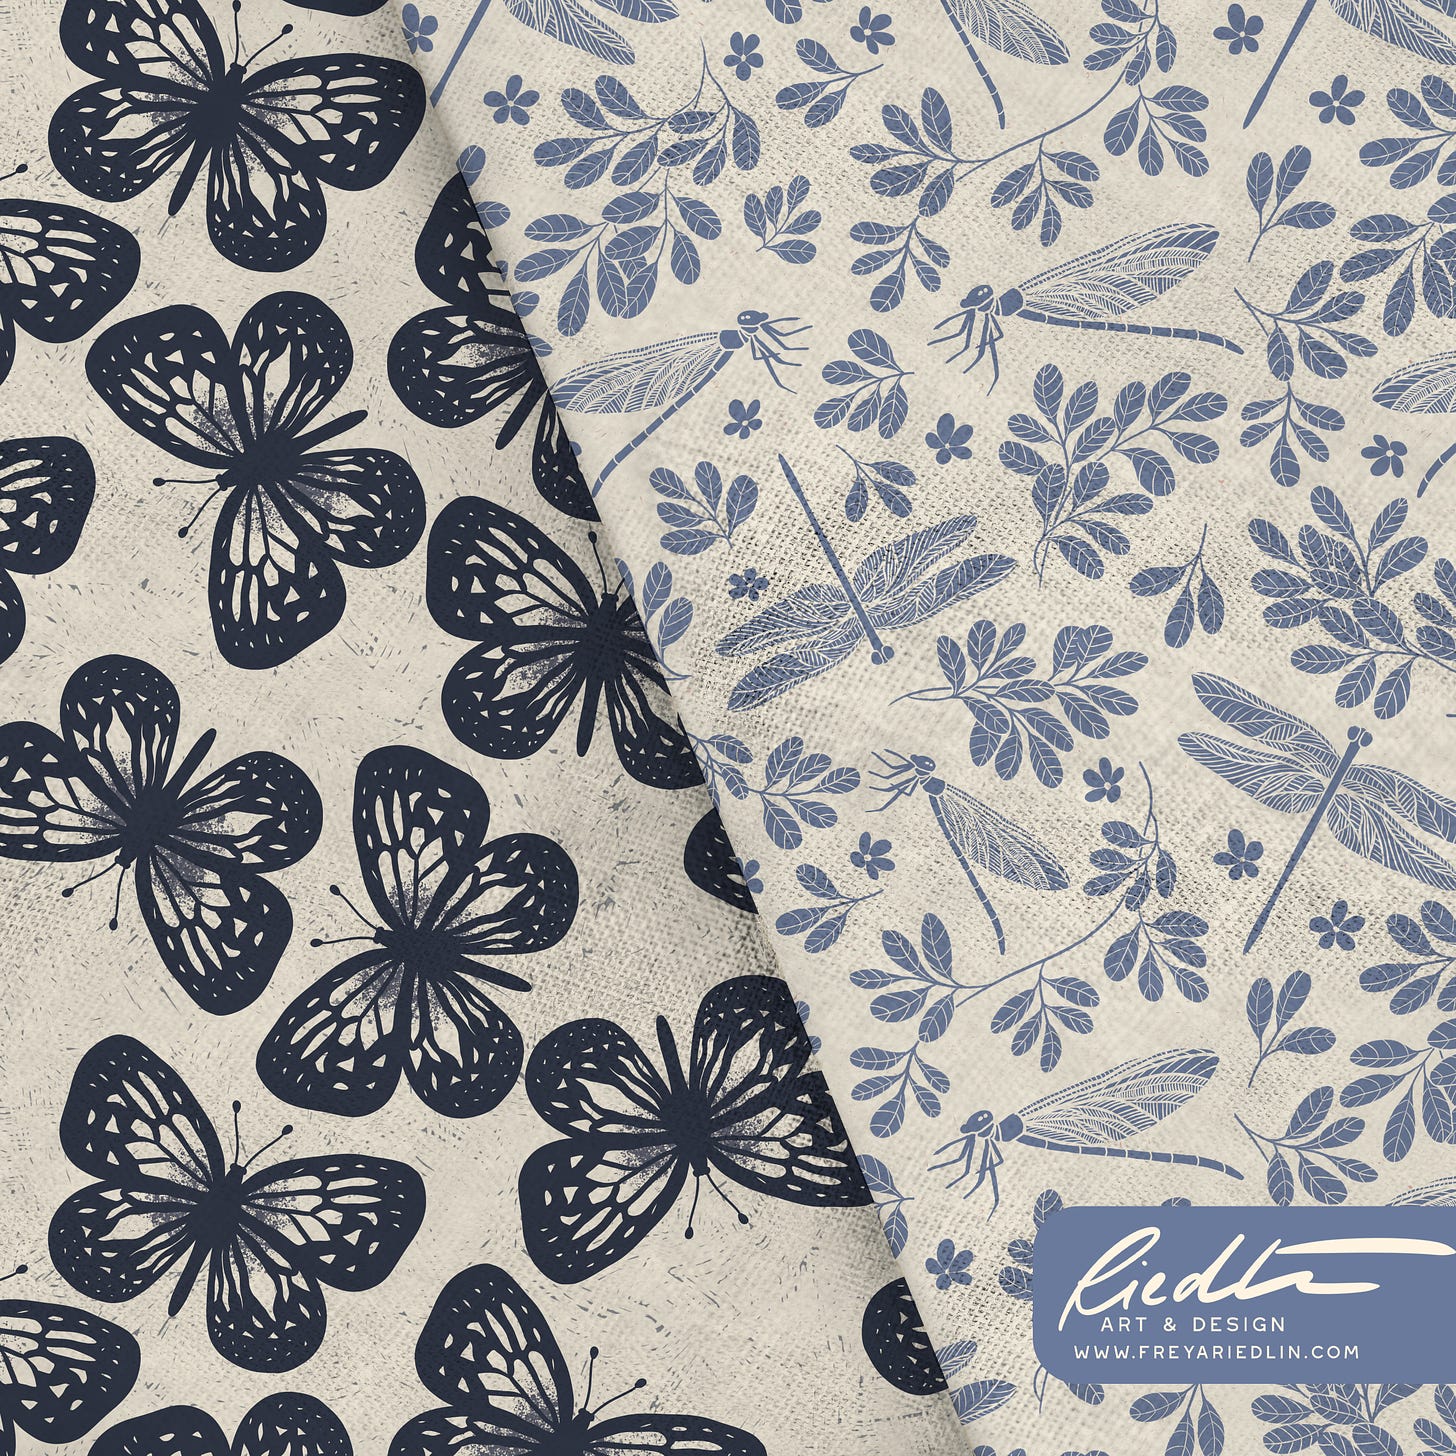 Two folded, diagonally overlapping fabrics. The bottom fabric is off-white, with a dark navy butterfly ditsy pattern. The top fabric has an off-white base, with a medium blue ditsy pattern of hand-drawn dragonflies, branches of leaves, and tiny flowers. 